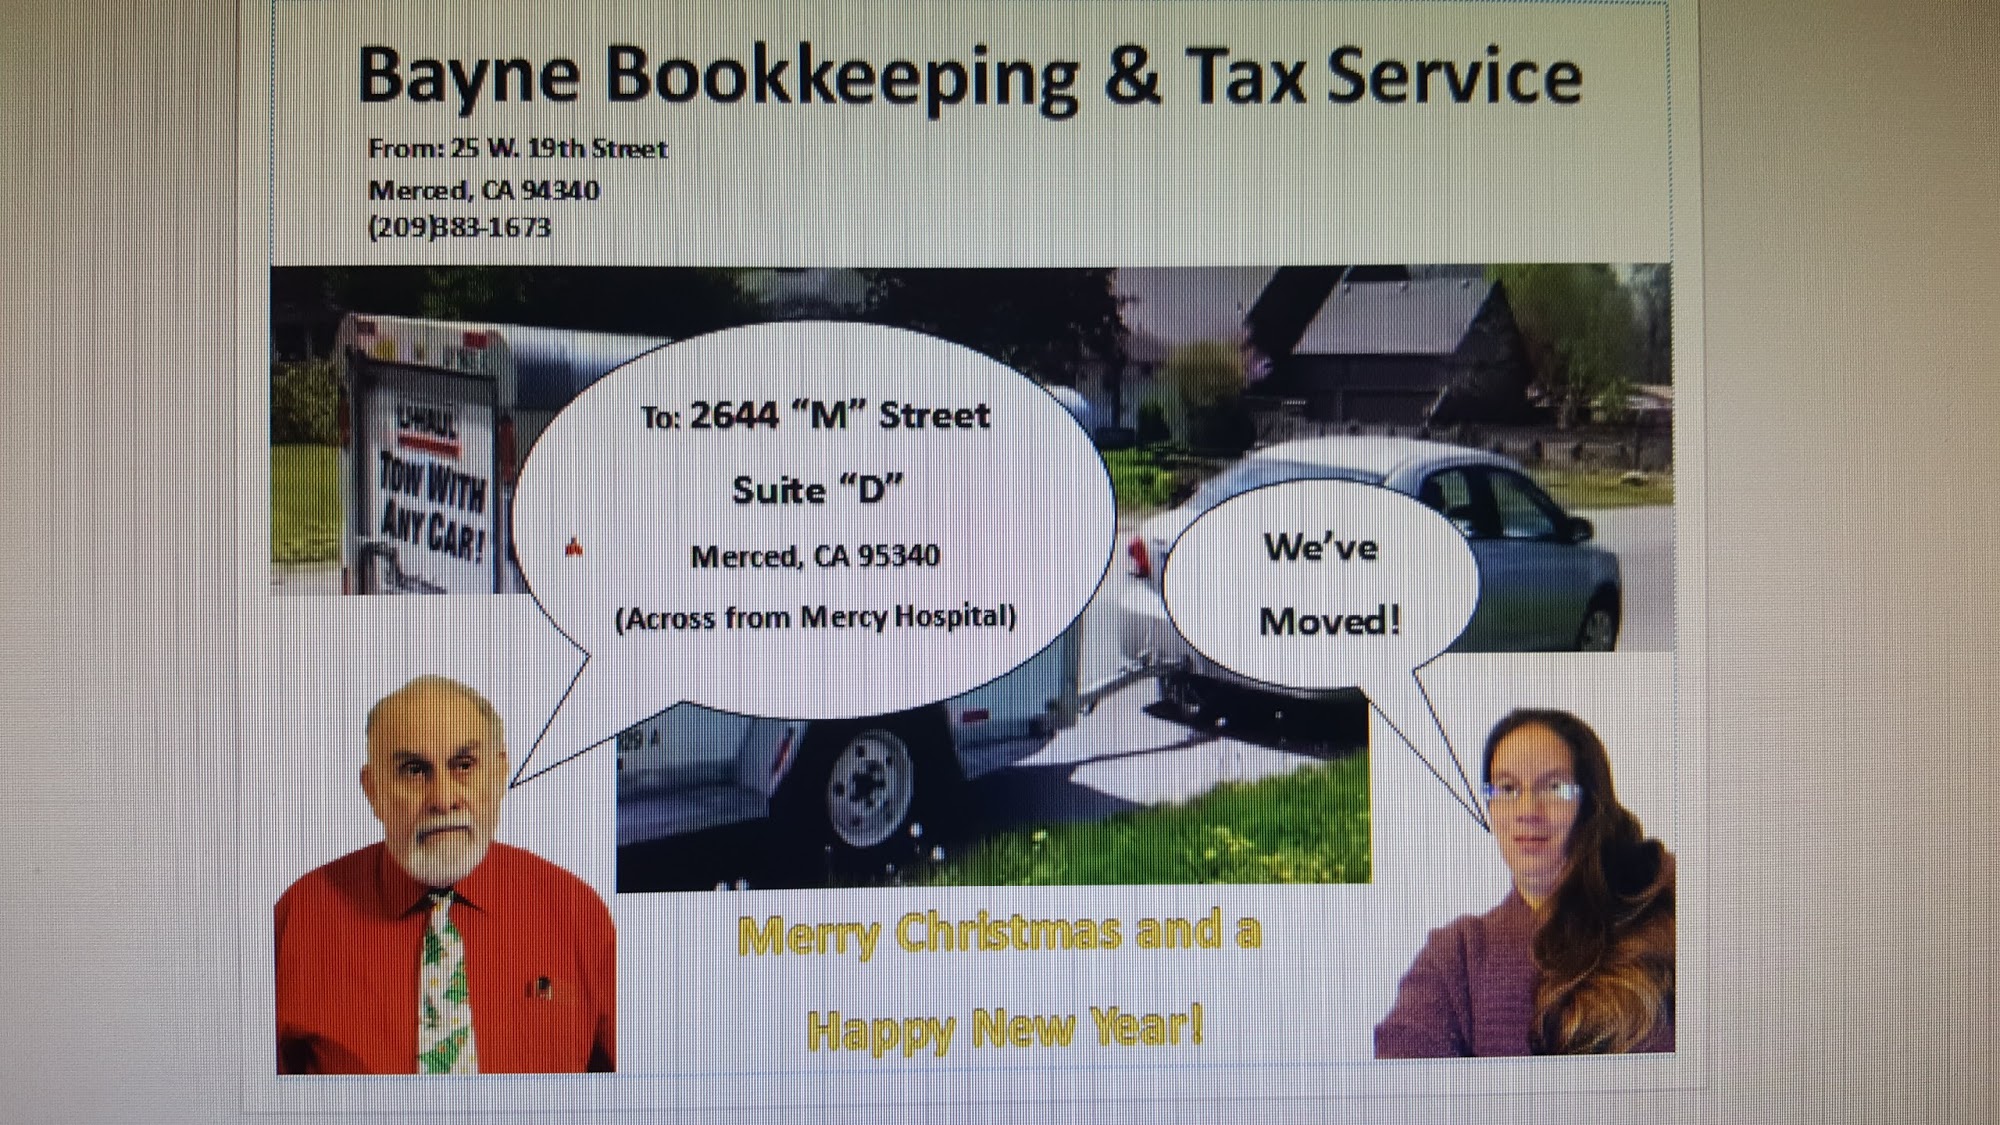 Bayne Bookkeeping & Tax Services